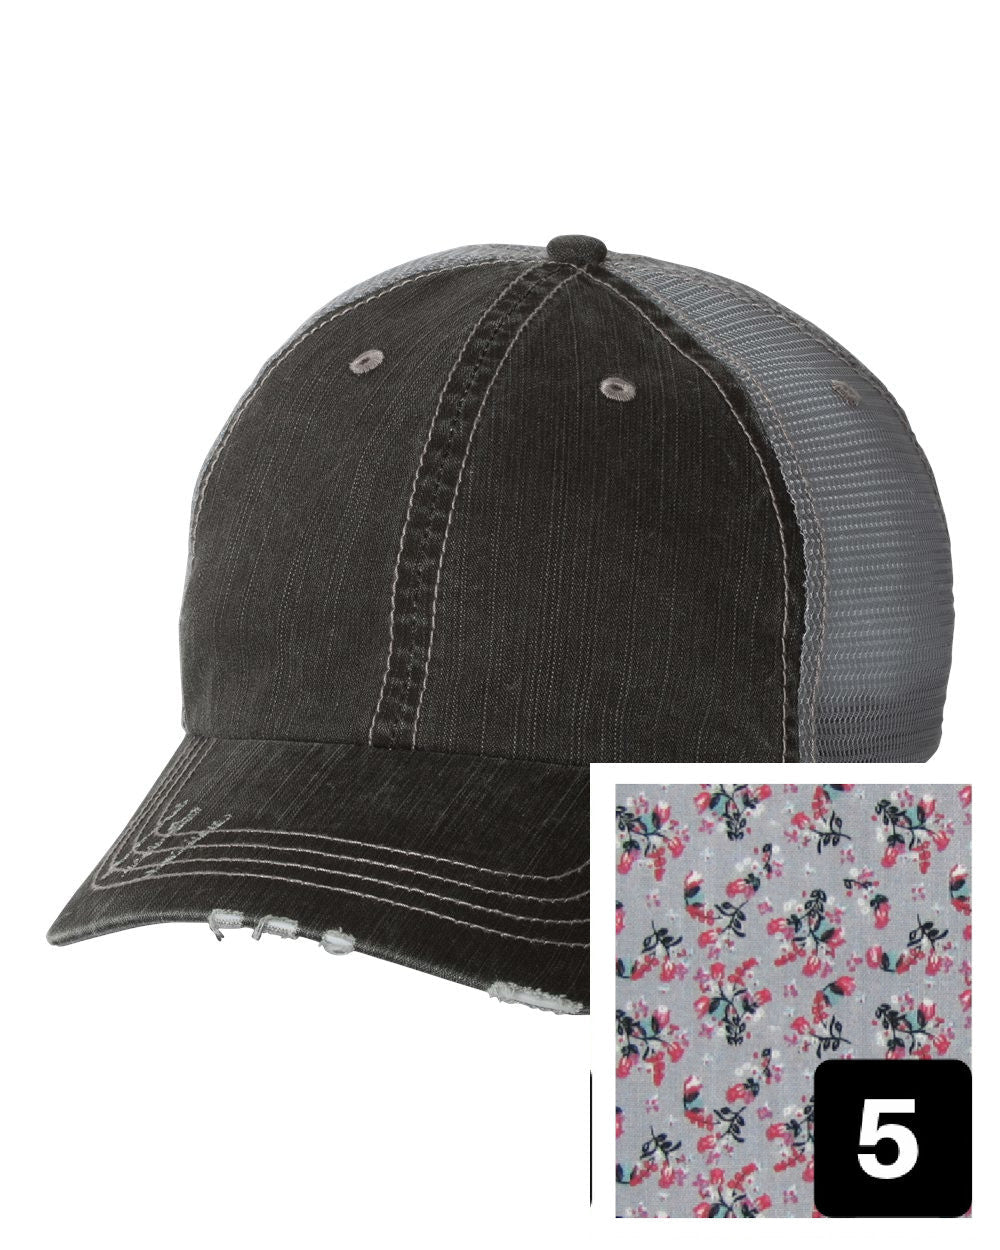 gray distressed trucker hat with purple and pink floral fabric state of Iowa